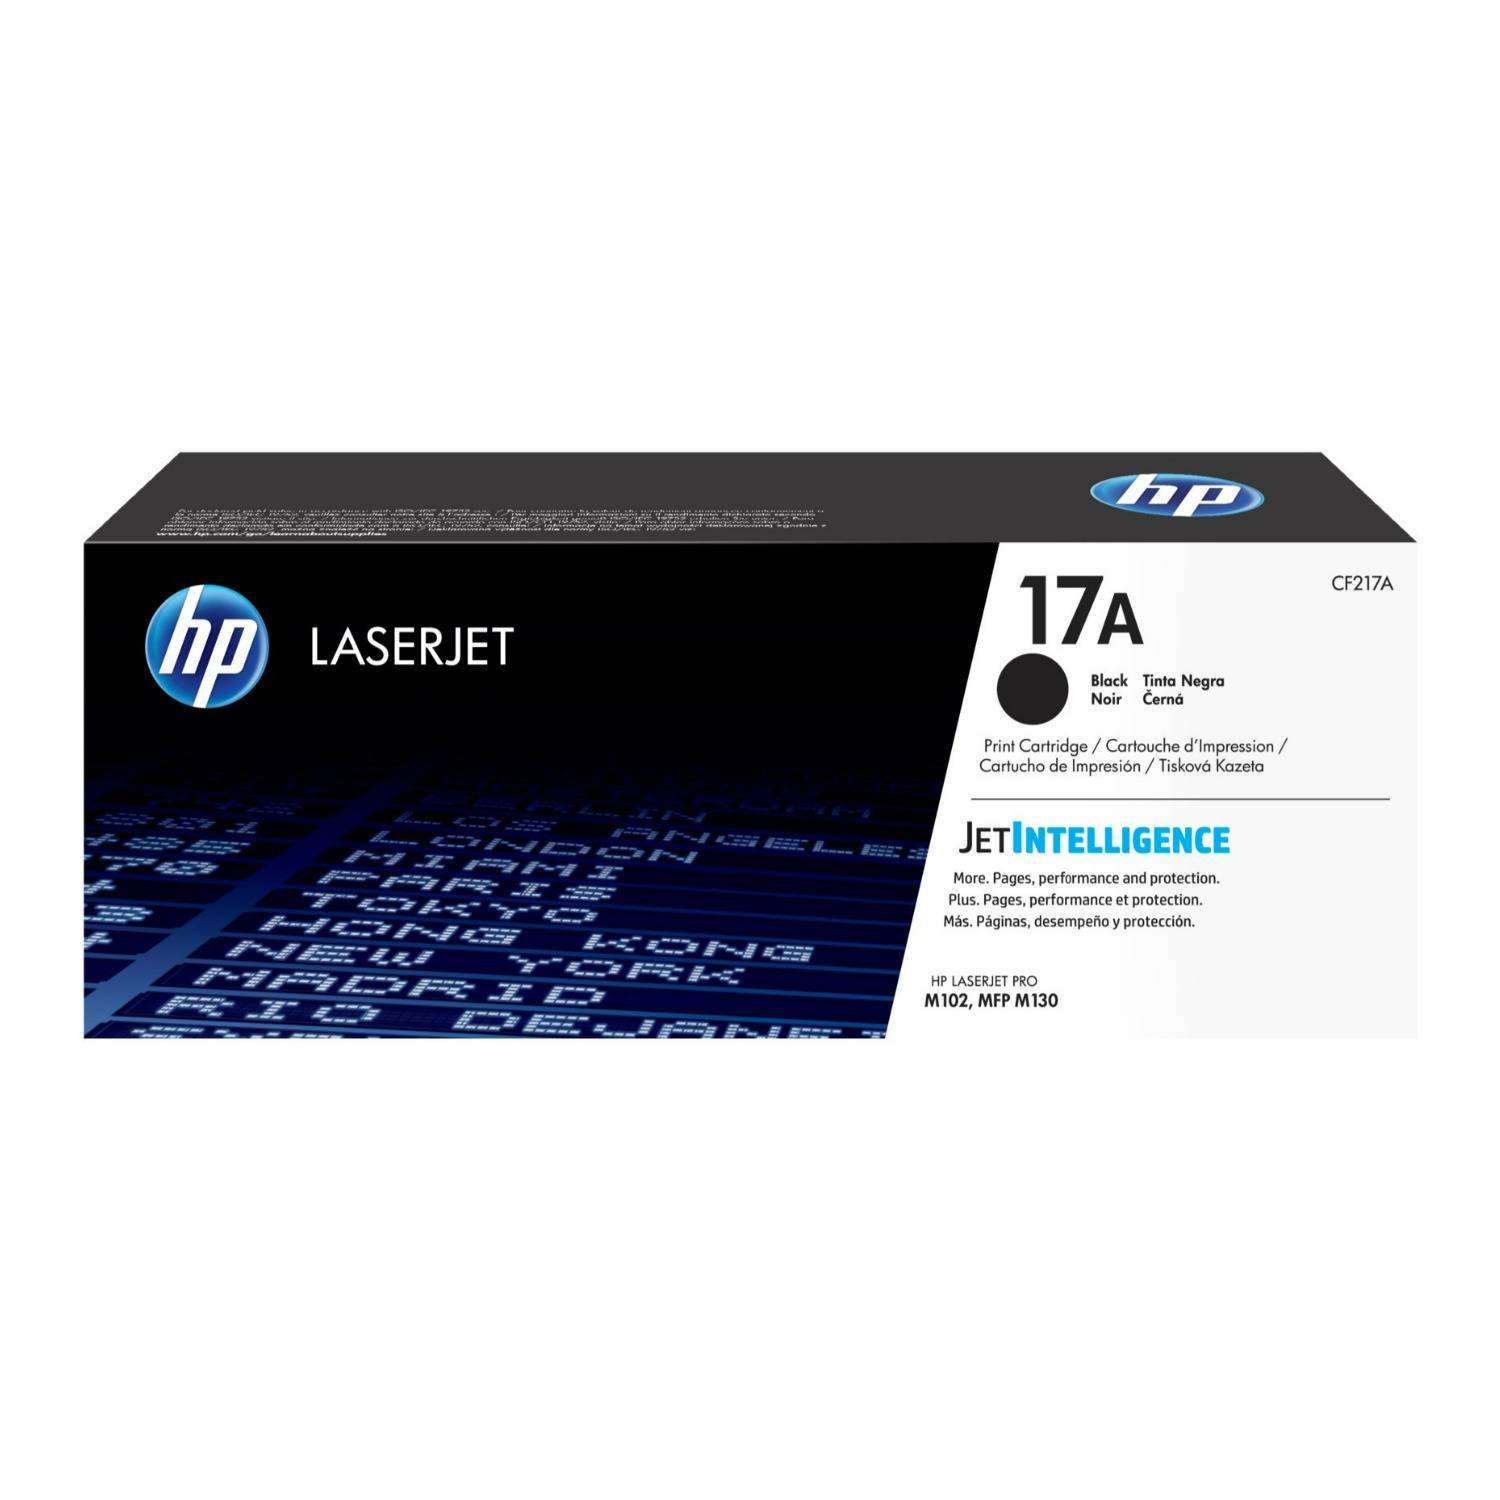 HP 17A Black Original LaserJet Toner Cartridge, Works with HP Printers and MFPs (1,600 Pages)